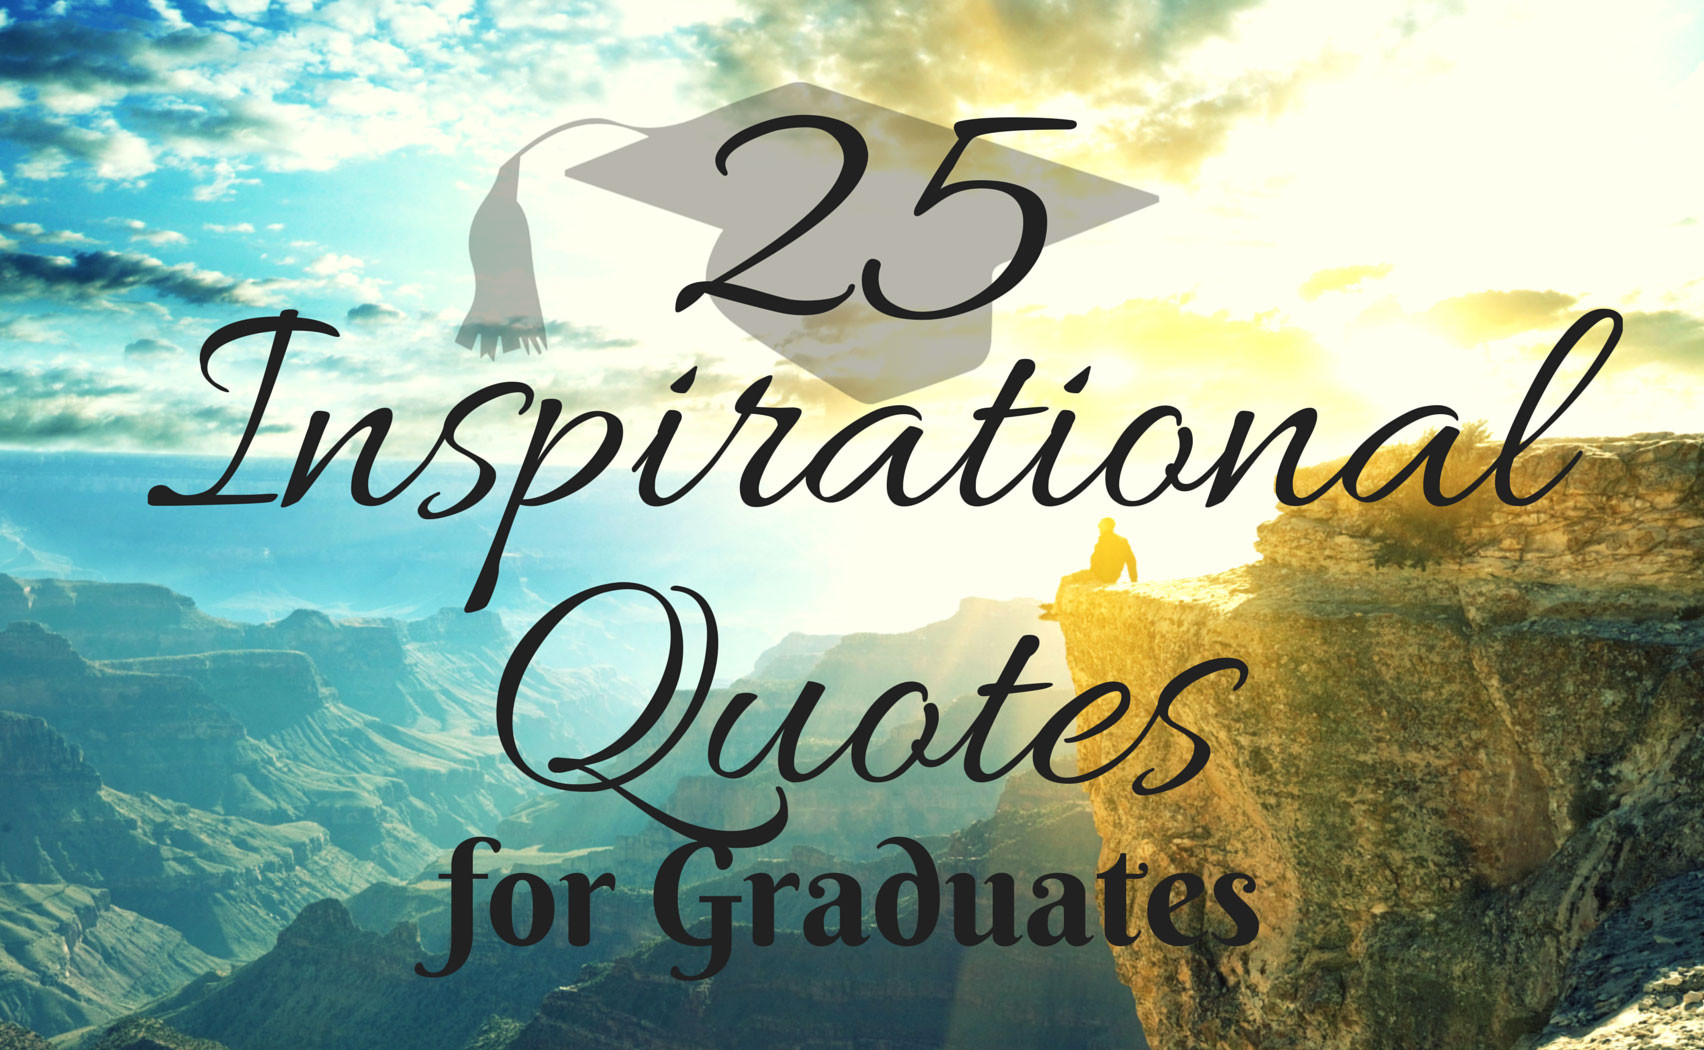 Graduation Motivational Quotes
 Graduation Quotes For Elementary Students QuotesGram